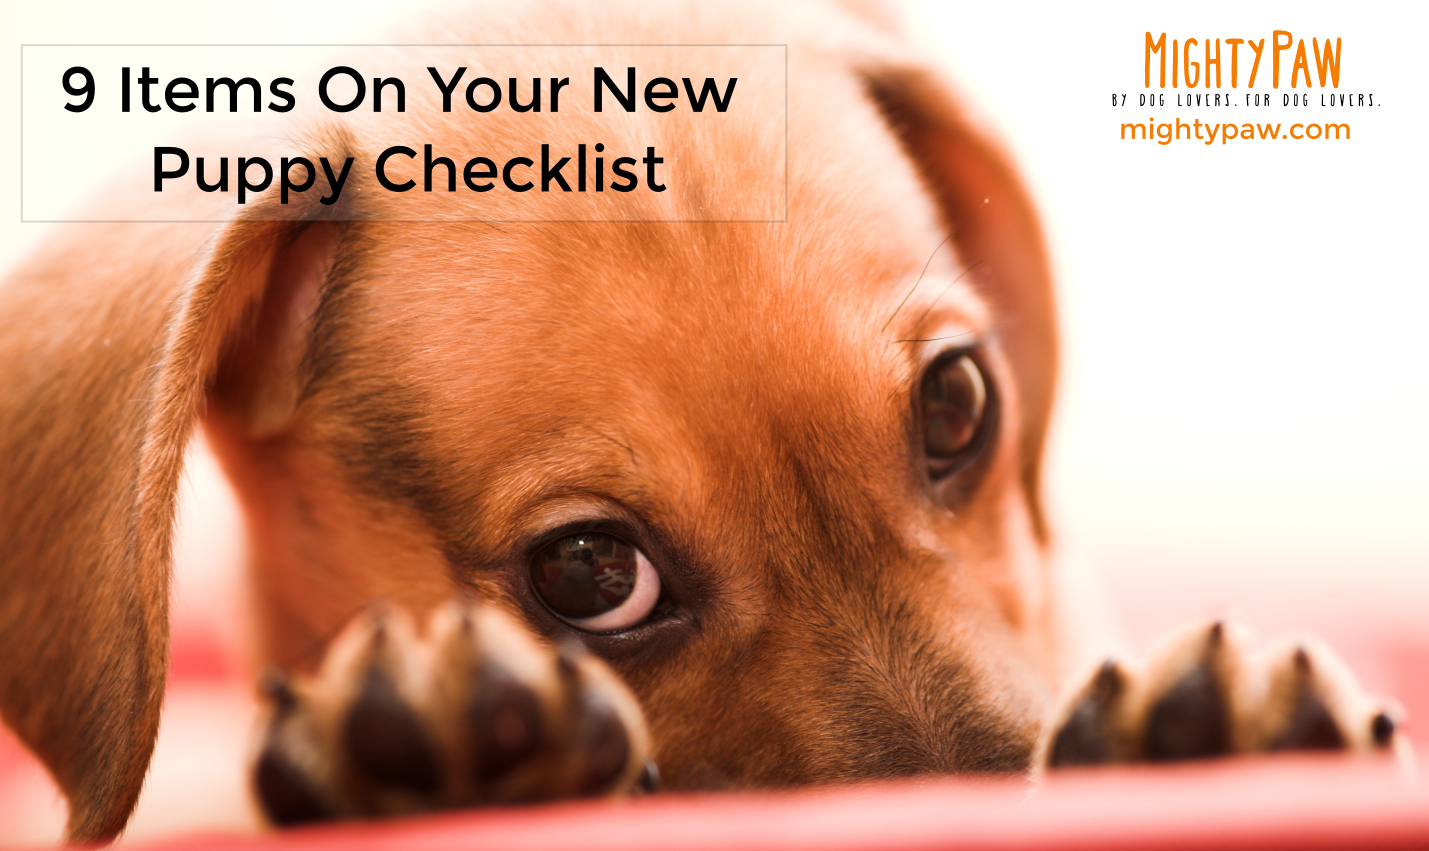 9 Items On Your New Puppy Checklist